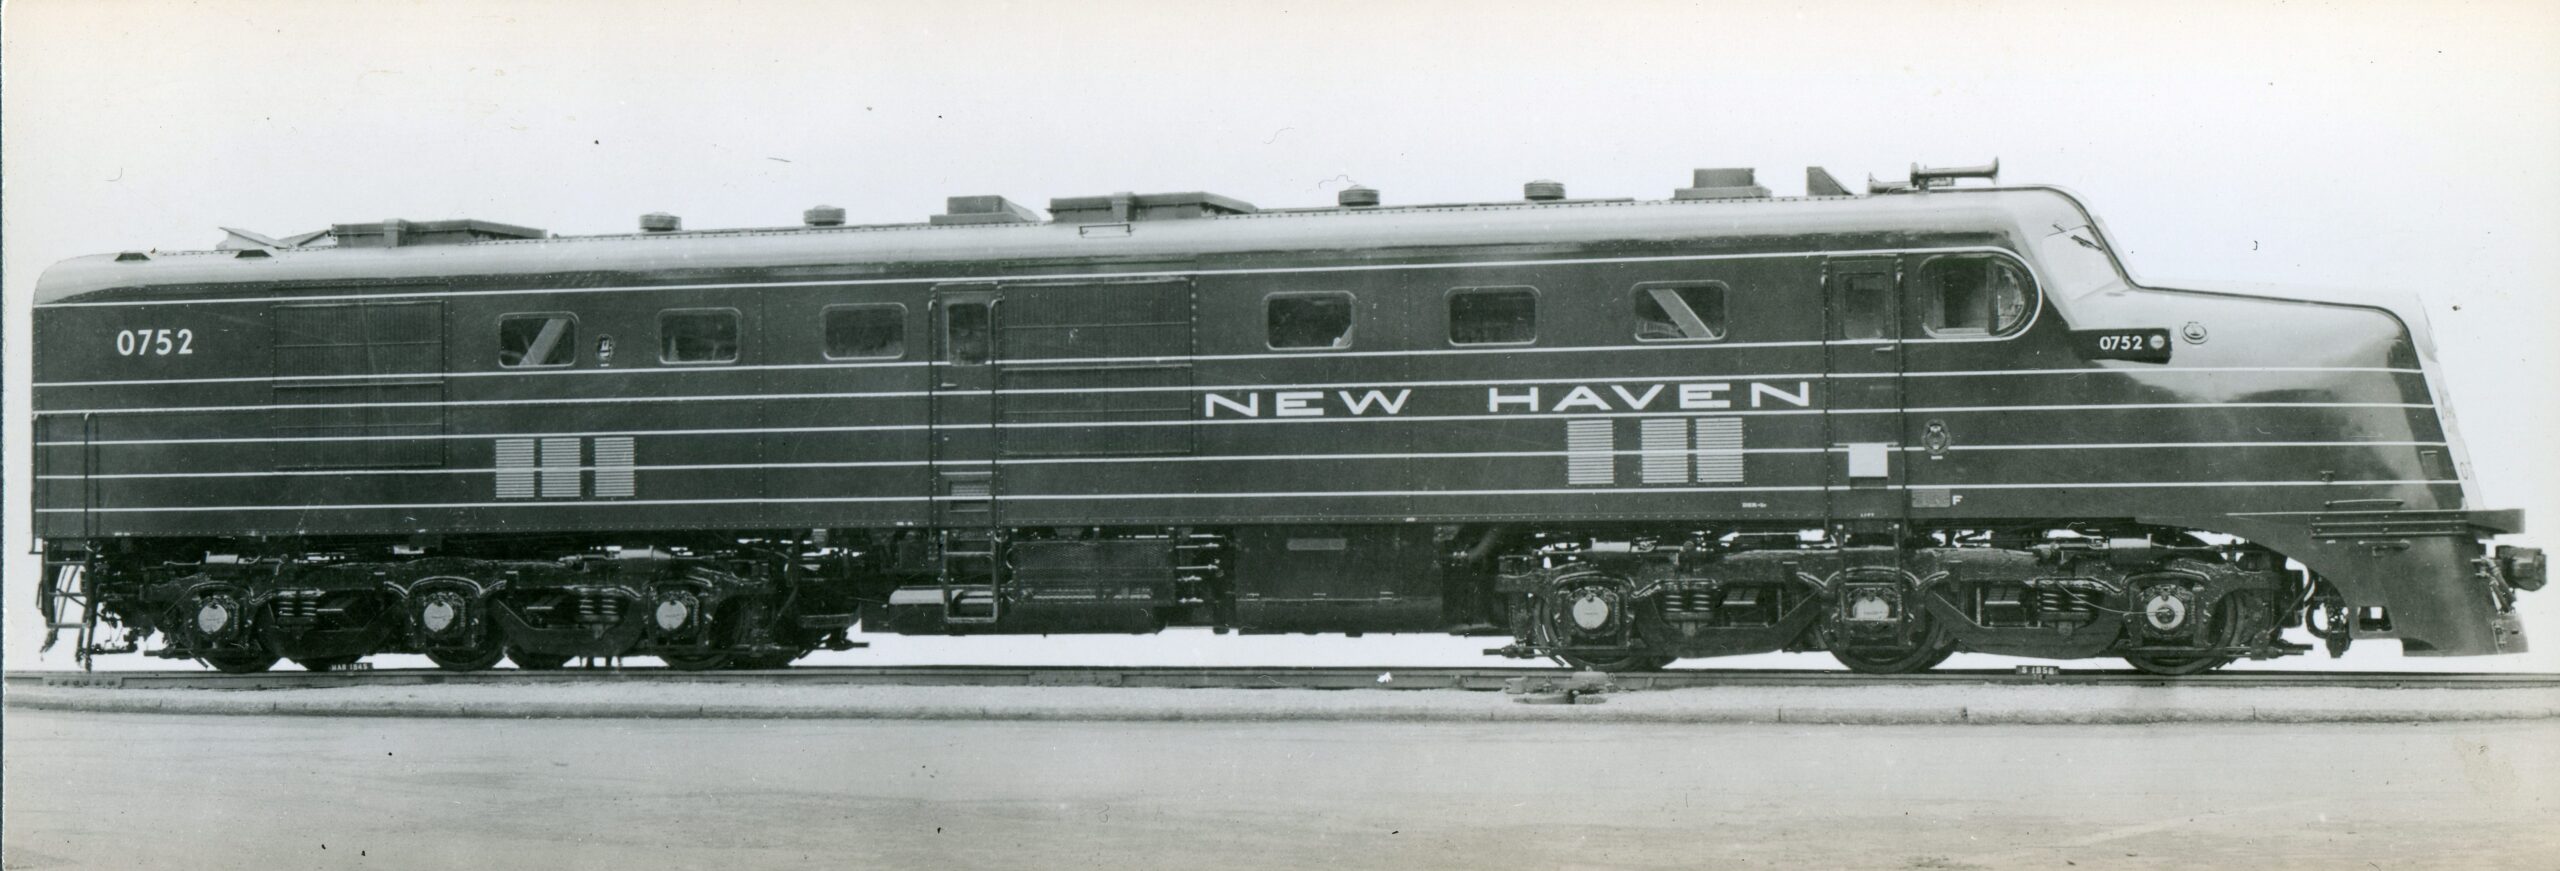 New Haven New York and Hartford Railroad | Schenectady, New York | Alco Class DL109 #0753 diesel-electric locomotive | 1941 | American Locomotive Company | Elmer Kremkow Collection